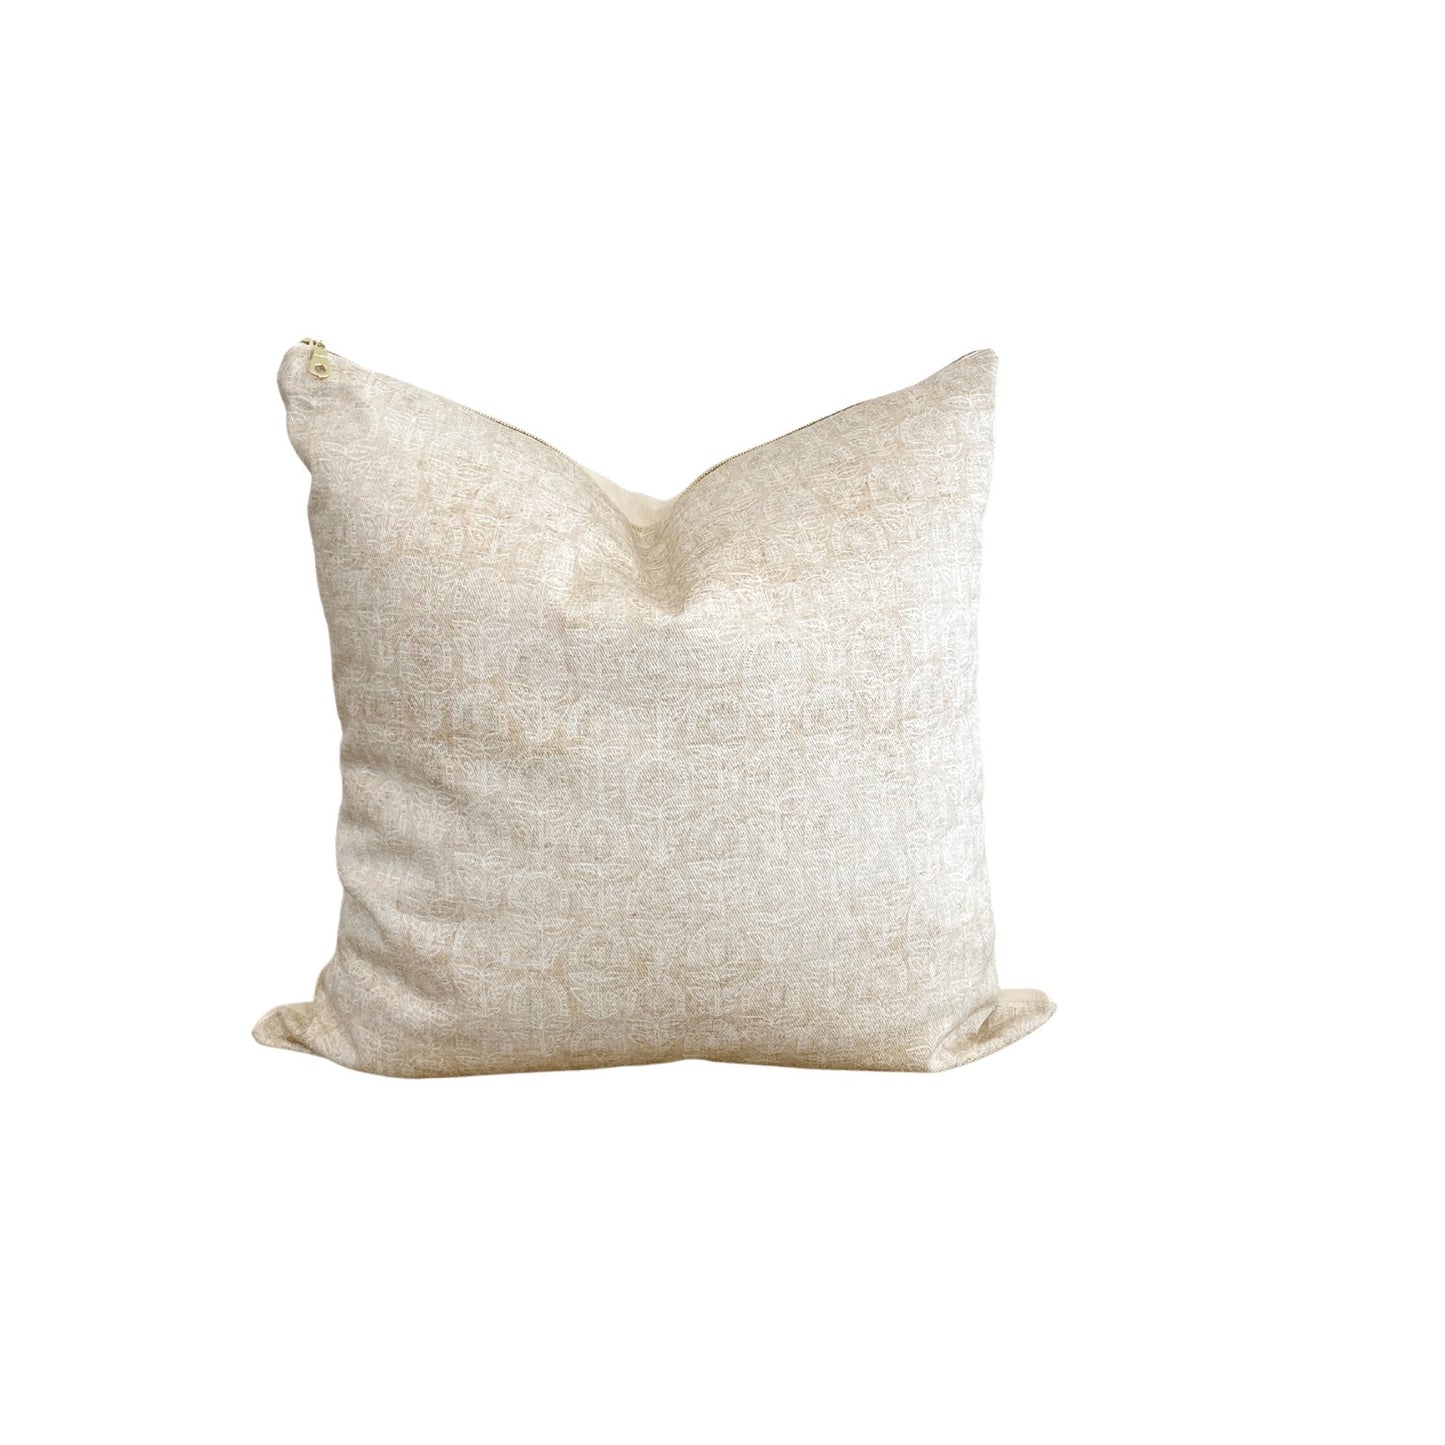 Farmhouse Kali Pillow Cover - Designed by Holli Zollinger